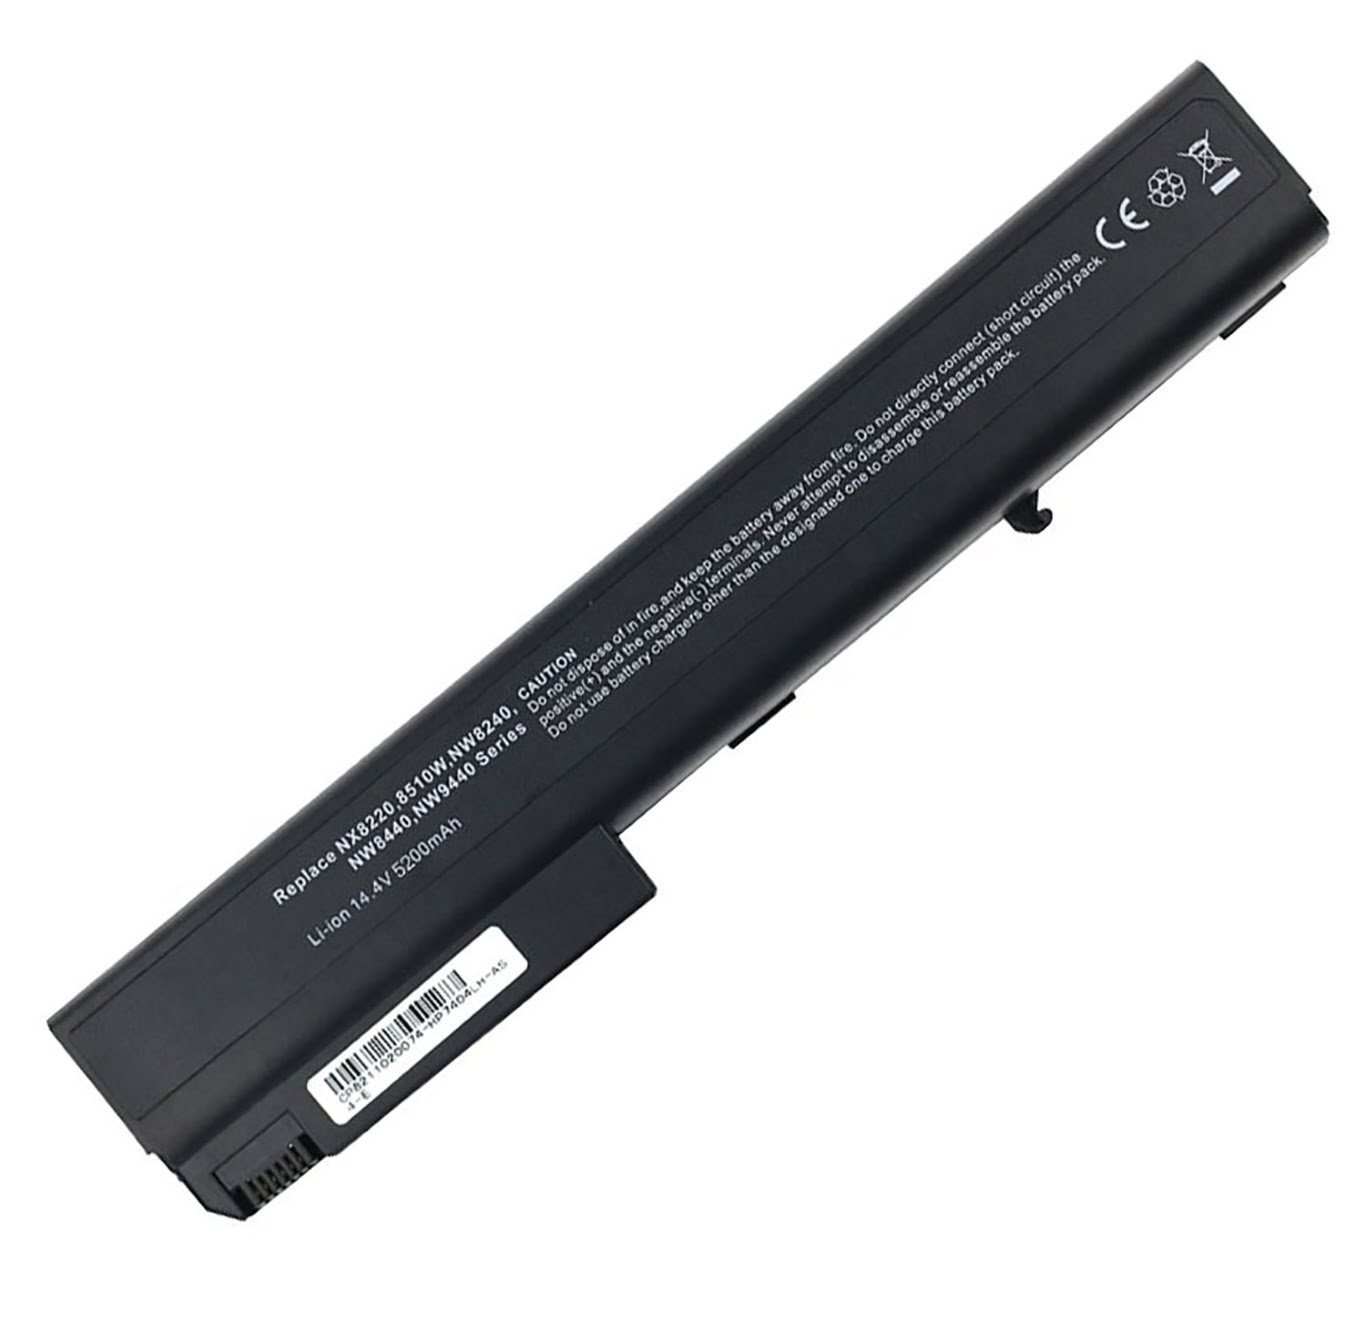 Hp 360318-001, 450477-001 Laptop Battery For 8510p, 8510w replacement